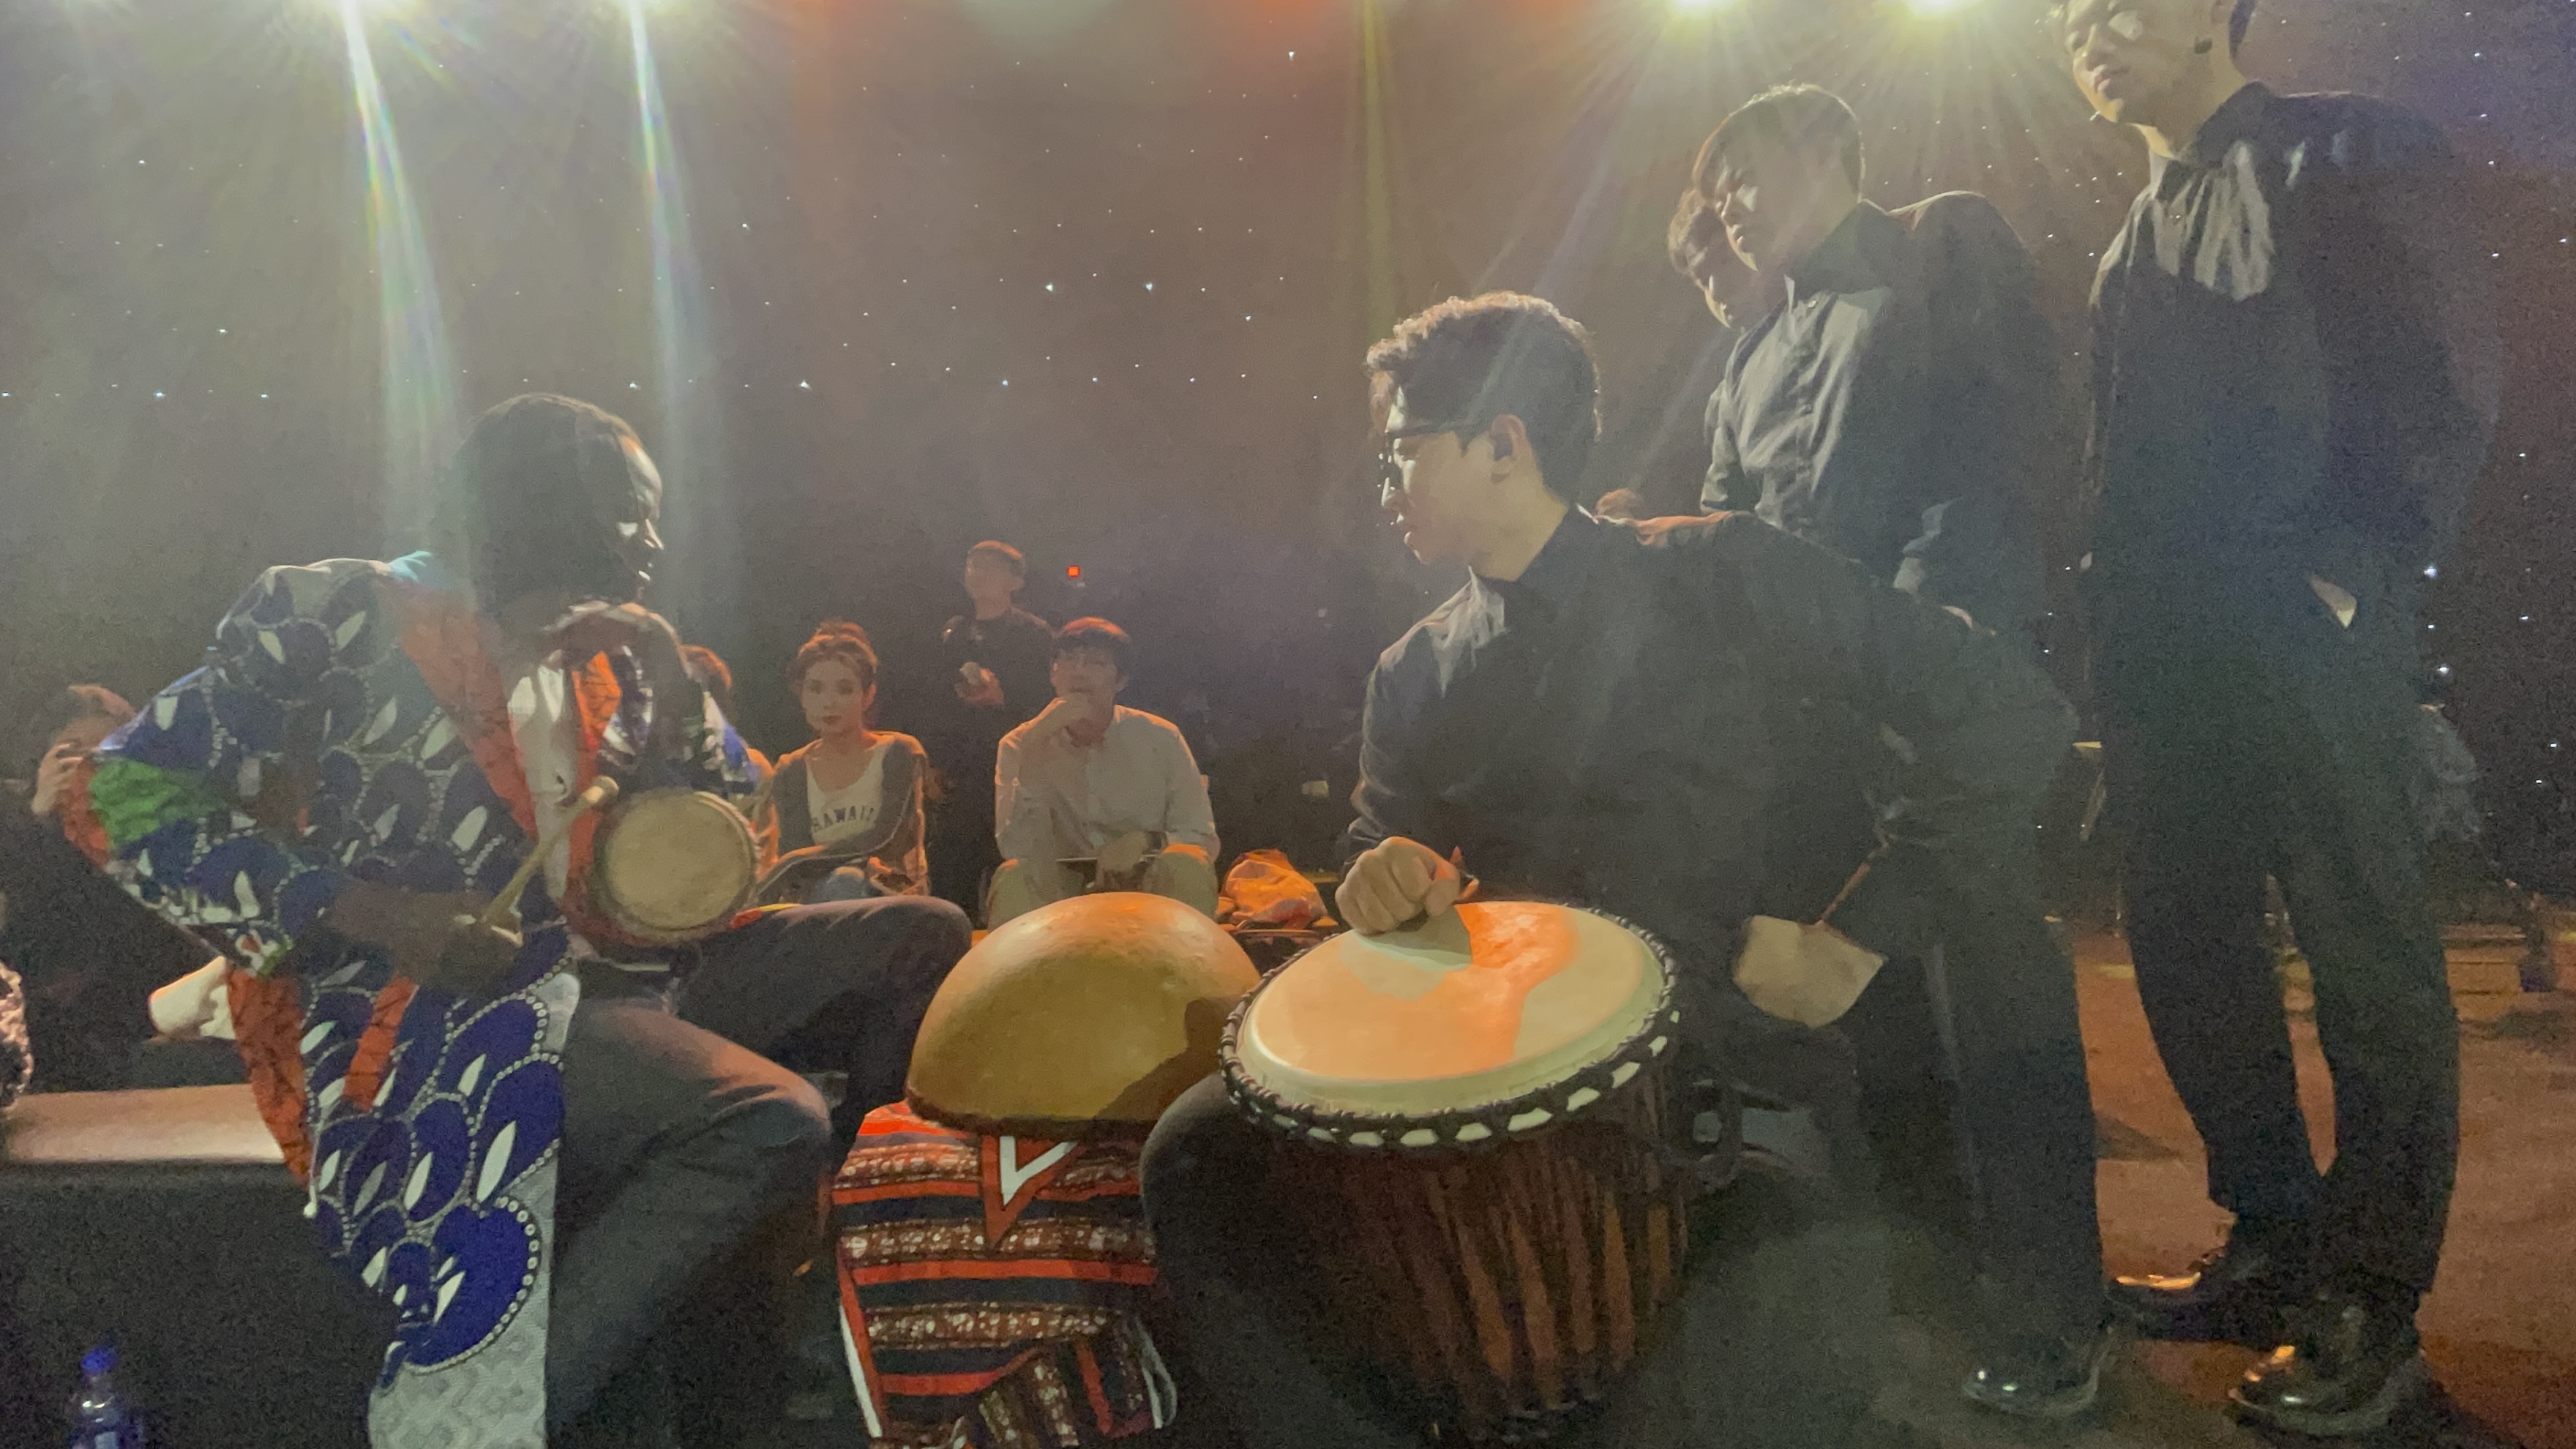 Cameroonian artist Abbe Simon jams with students from the China Conservatory of Music at 